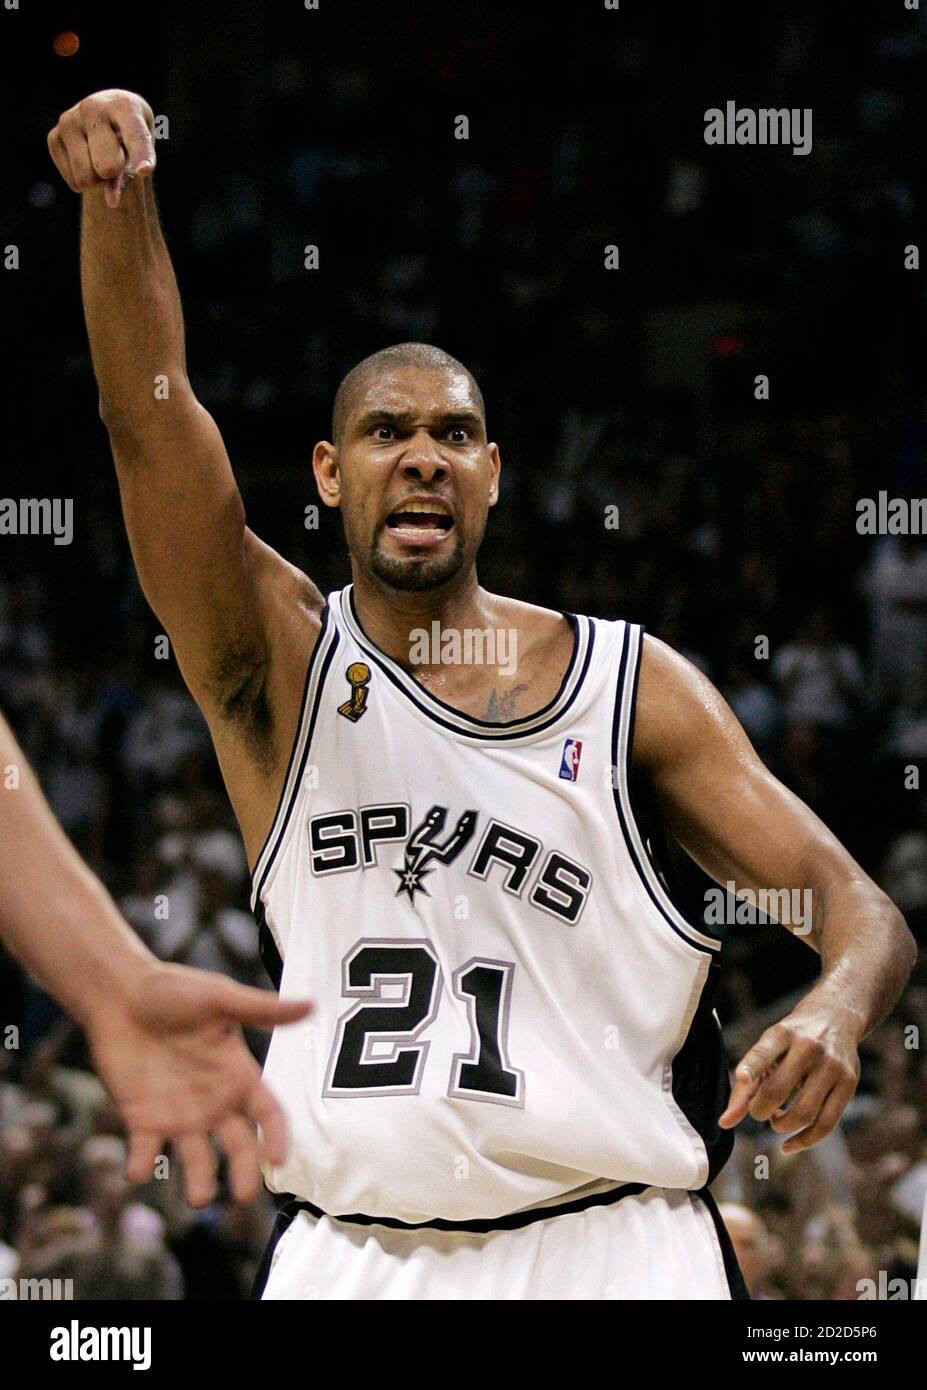 San Antonio Spurs' Tim Duncan reacts after scoring a basket against the  Cleveland Cavaliers during the 4th quarter of Game 2 of the NBA Finals  basketball series in San Antonio, Texas June